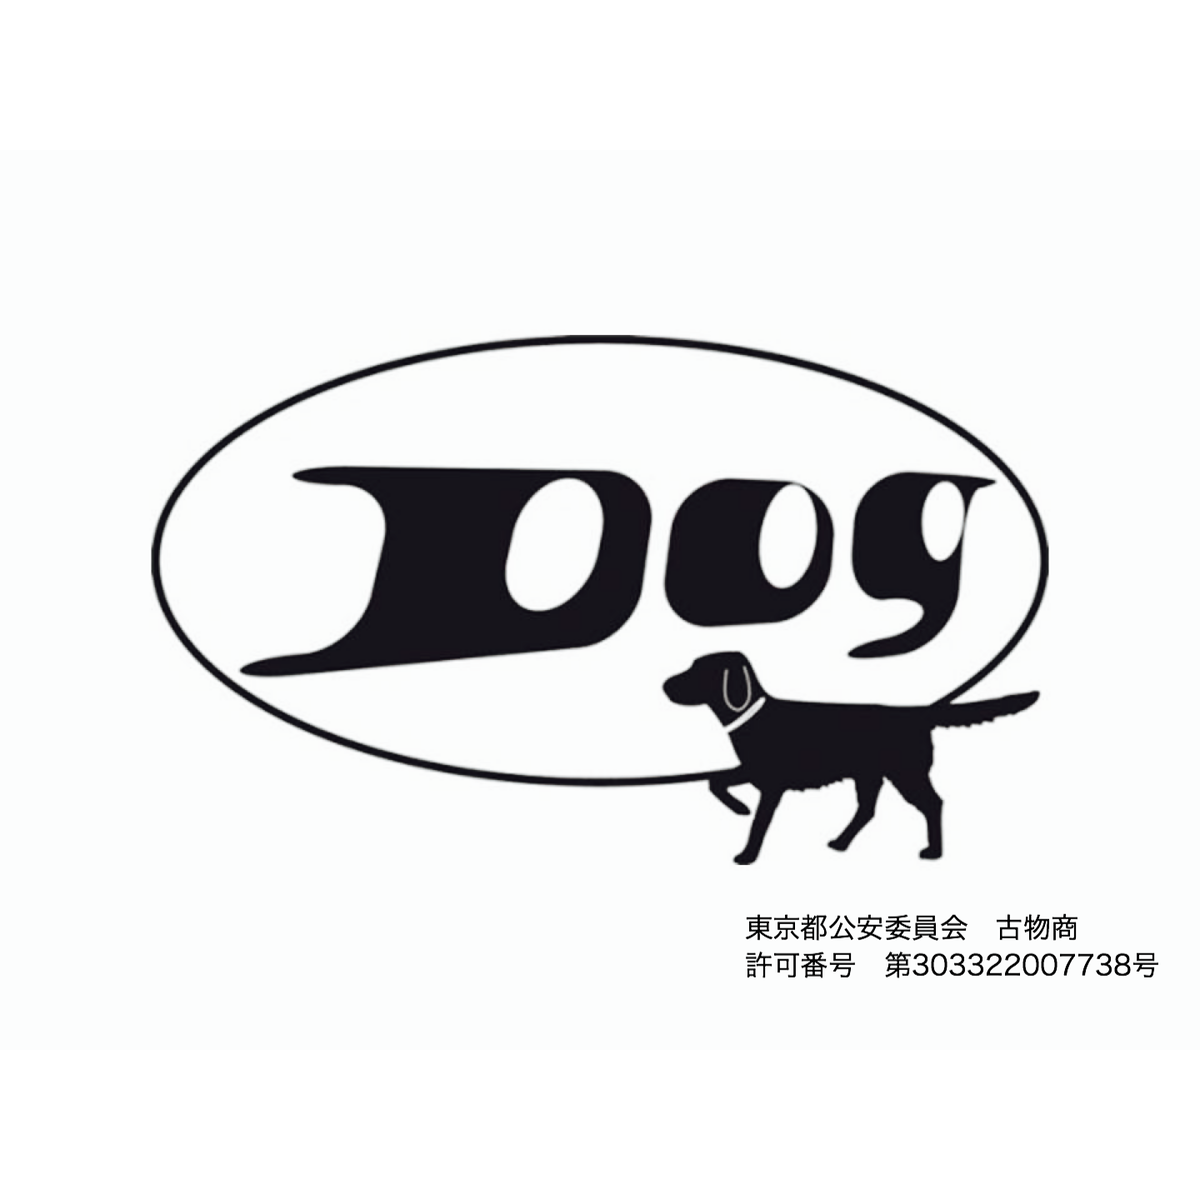 About Dog